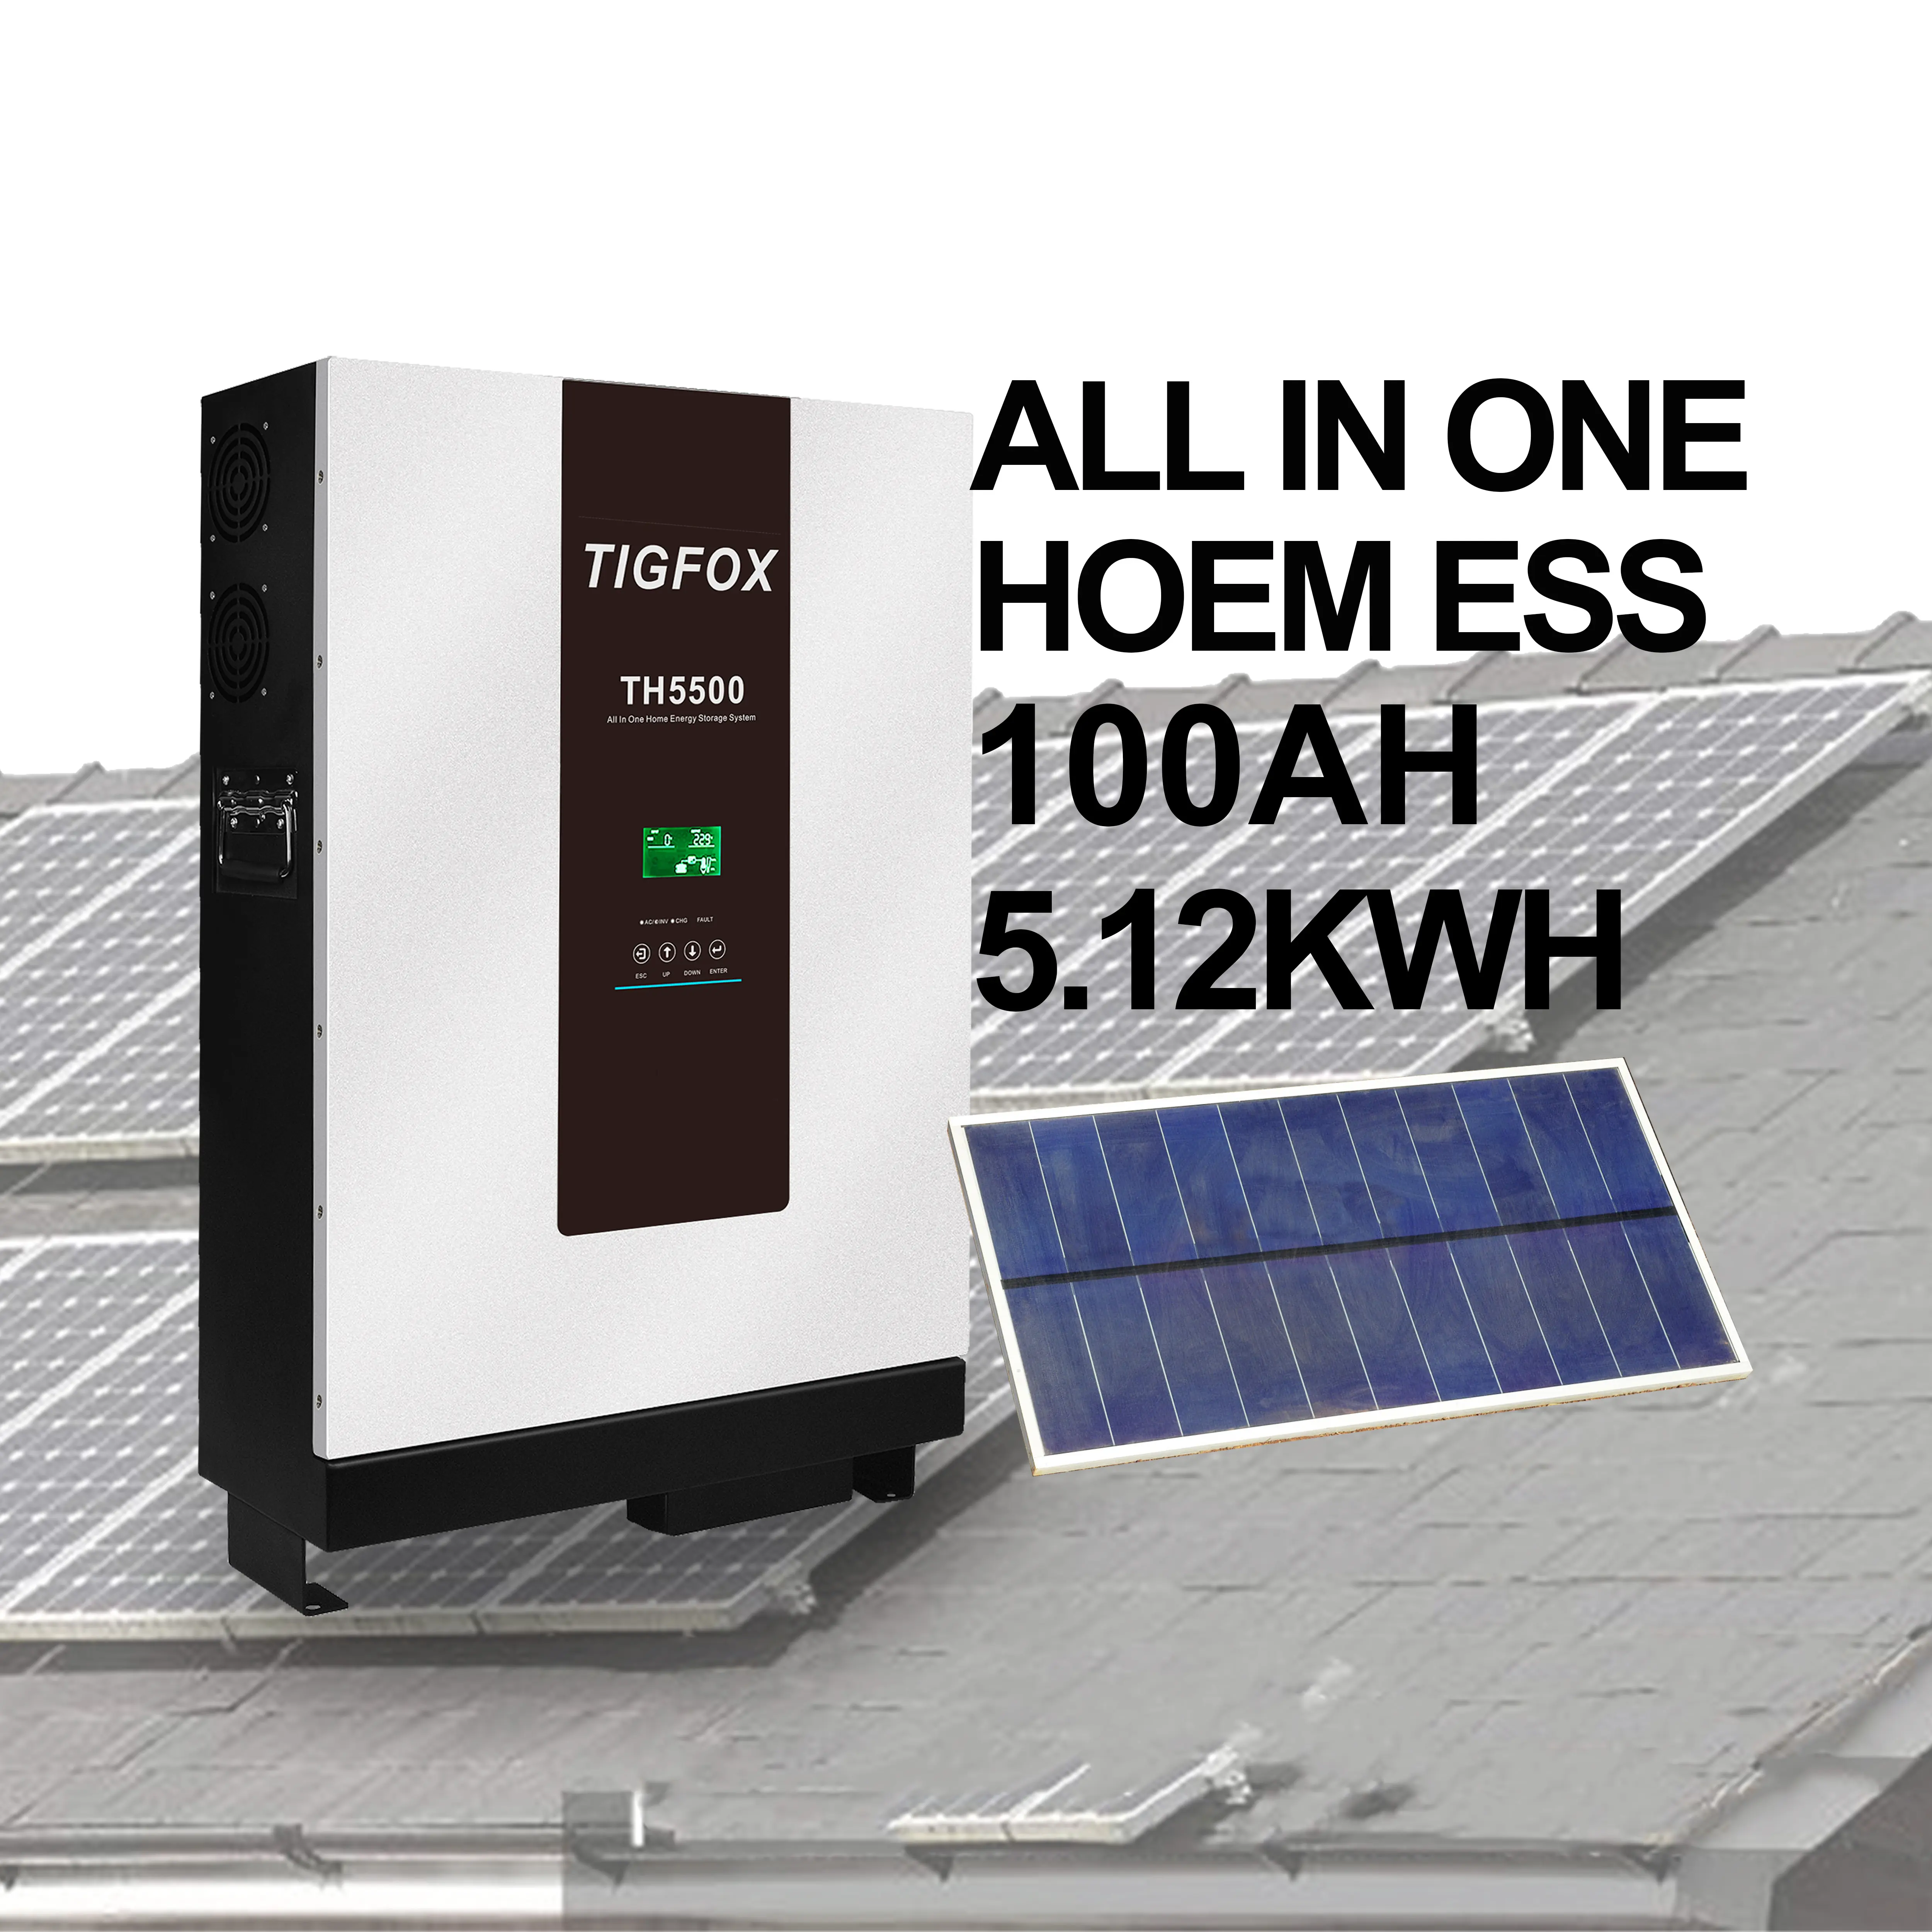 Tigfox All In One 48V Accu Inverter Compleet Huis Energie Opslag Systeem Voor Zonne-Energie Pv Systeem Opslag 5kw Zonne-Energie Systeem